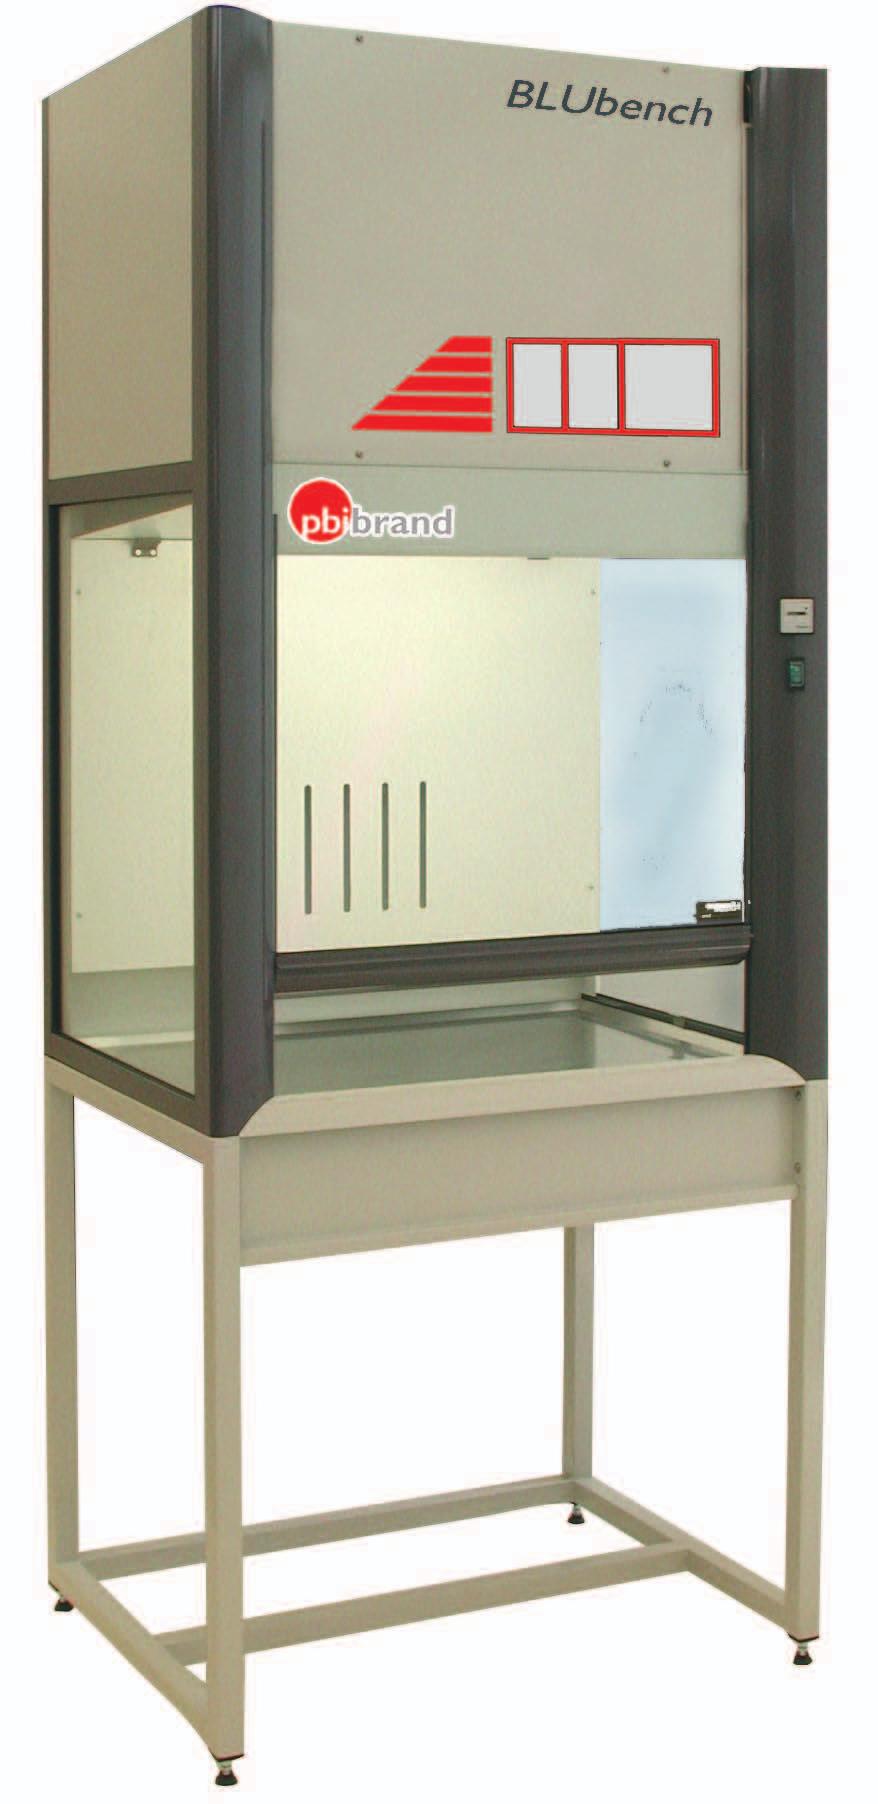 BLUbench Basic - TYPE 100/120/150/180 DUCTLESS FUME CABINET ACTIVATED CARBON FILTRATION WITH AIR RECIRCULATING DESIGN COMPLETE SAFETY AND LARGE WORKING SURFACE In compliance with BS 7258 and BS 7989